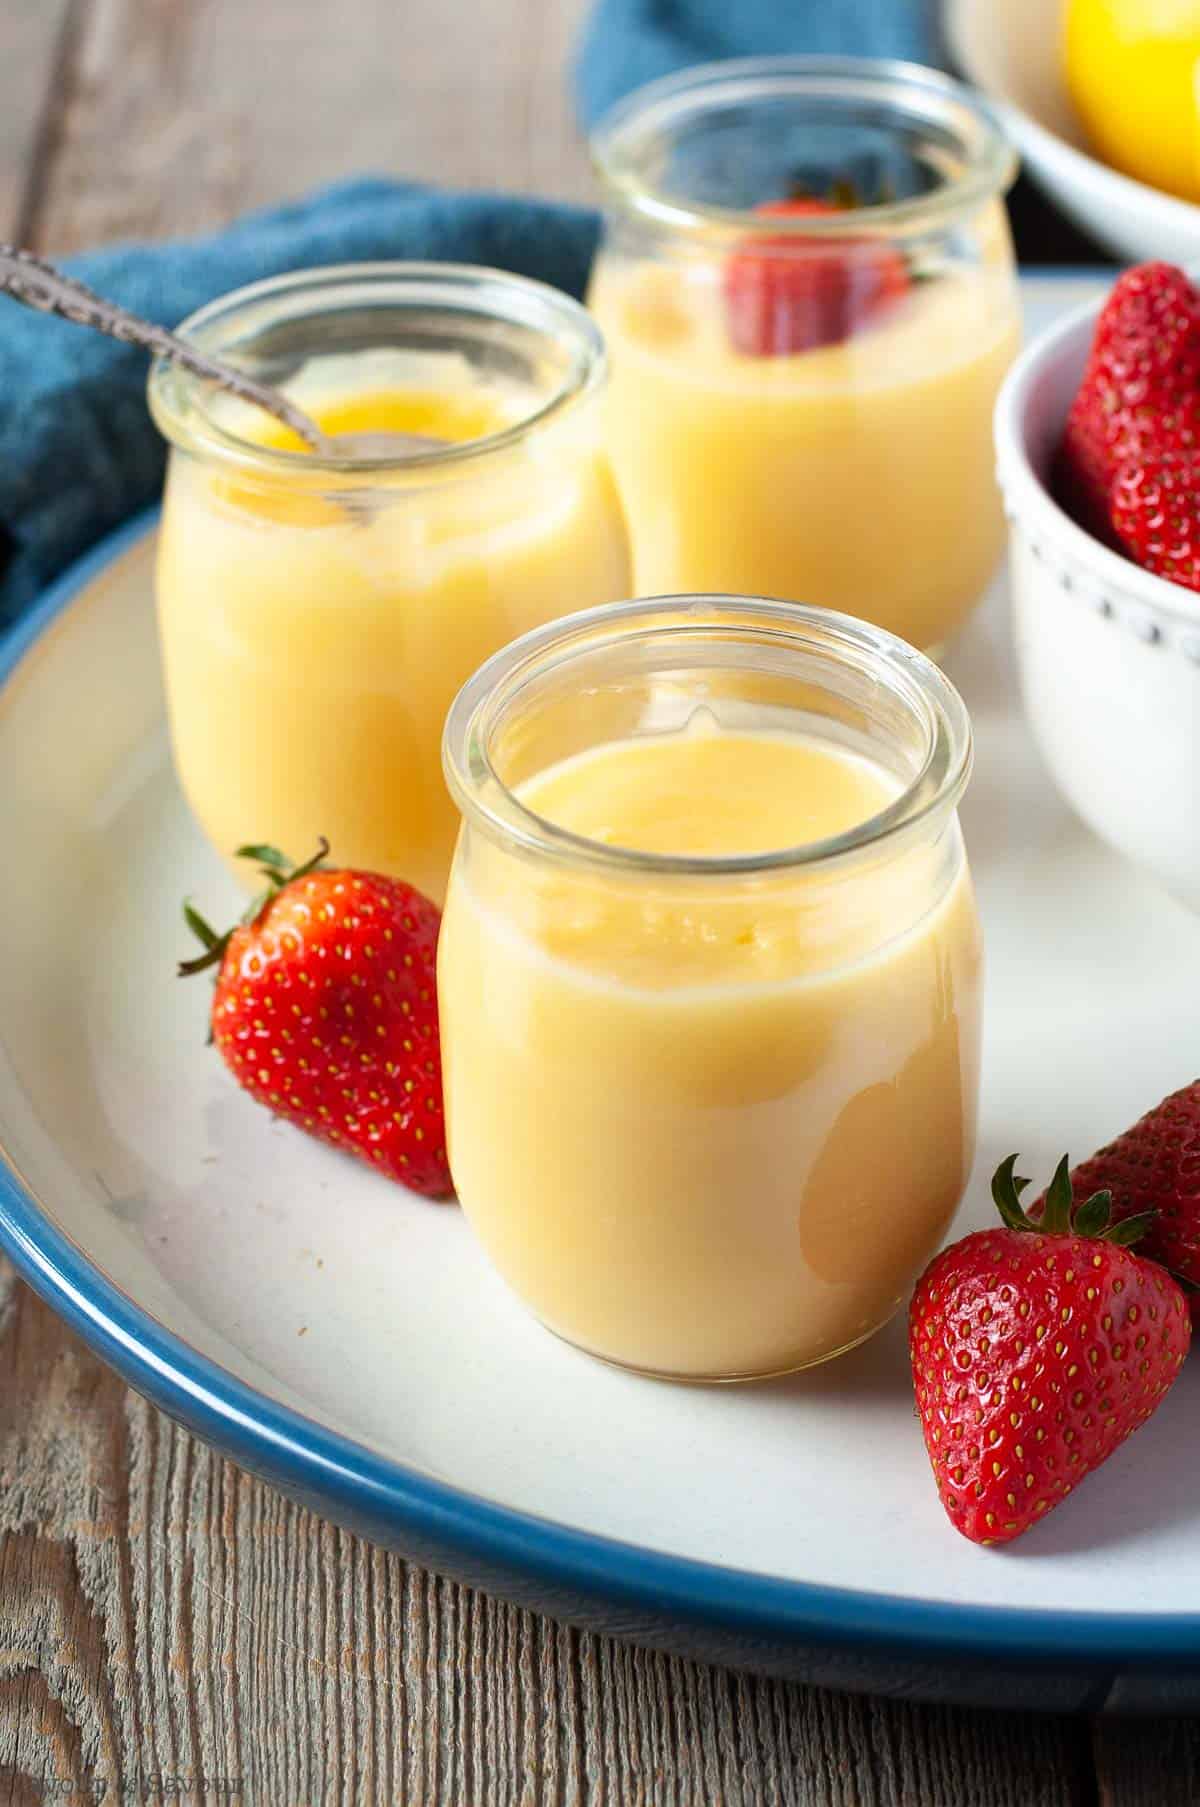 3 jars of Microwave Lemon Curd with fresh strawberries, a gluten-free dessert for Easter and Spring